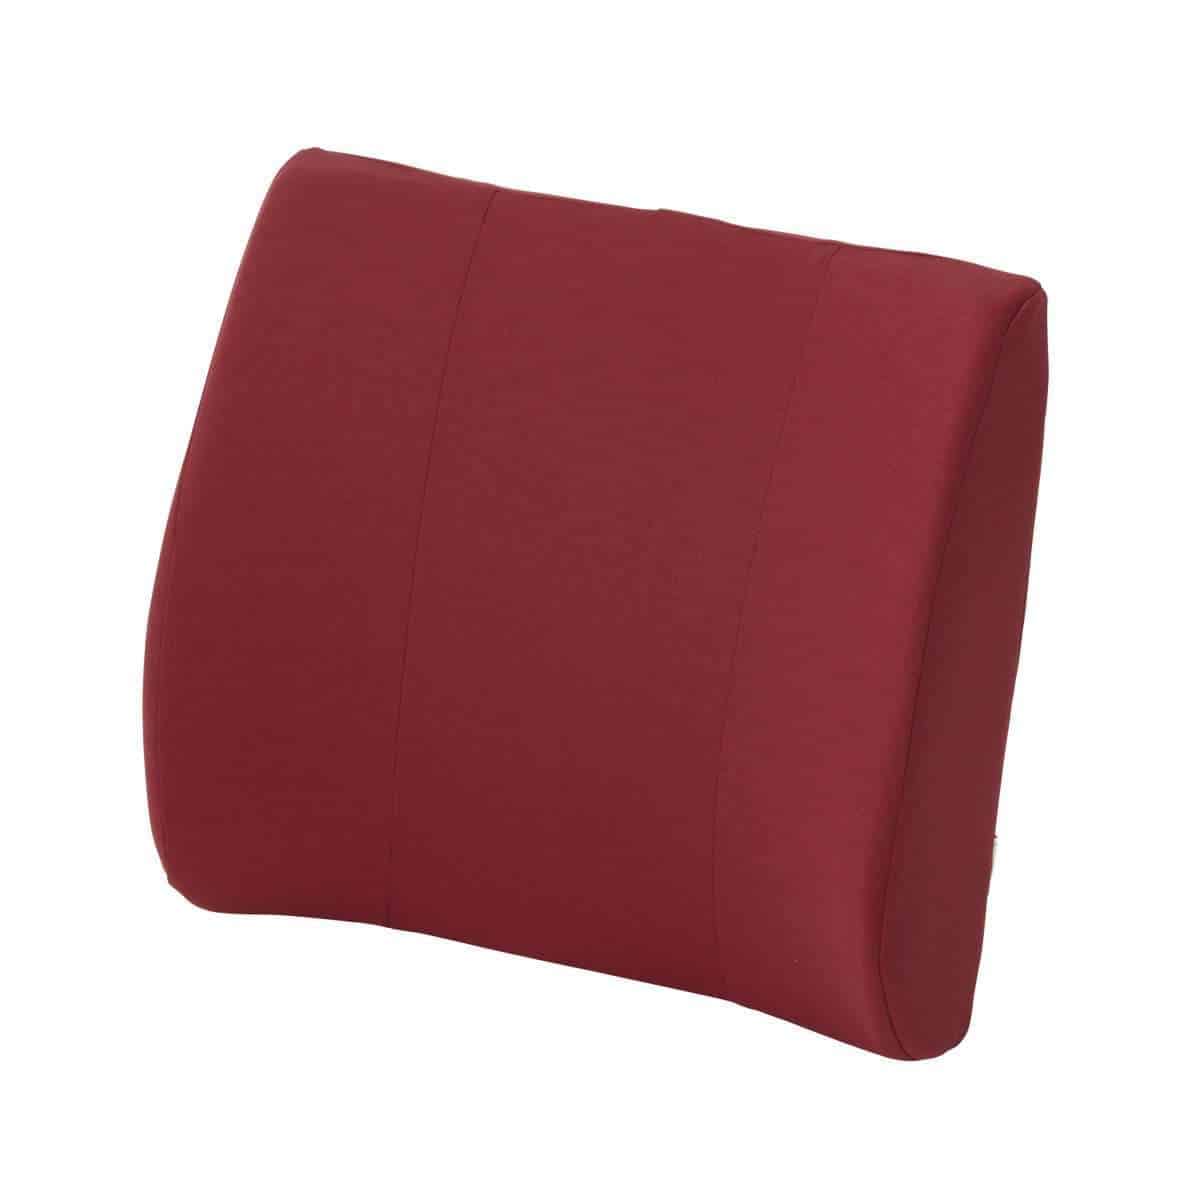 DMI Relax-a-Bac Lumbar Back Cushion with Insert and Strap, Burgundy